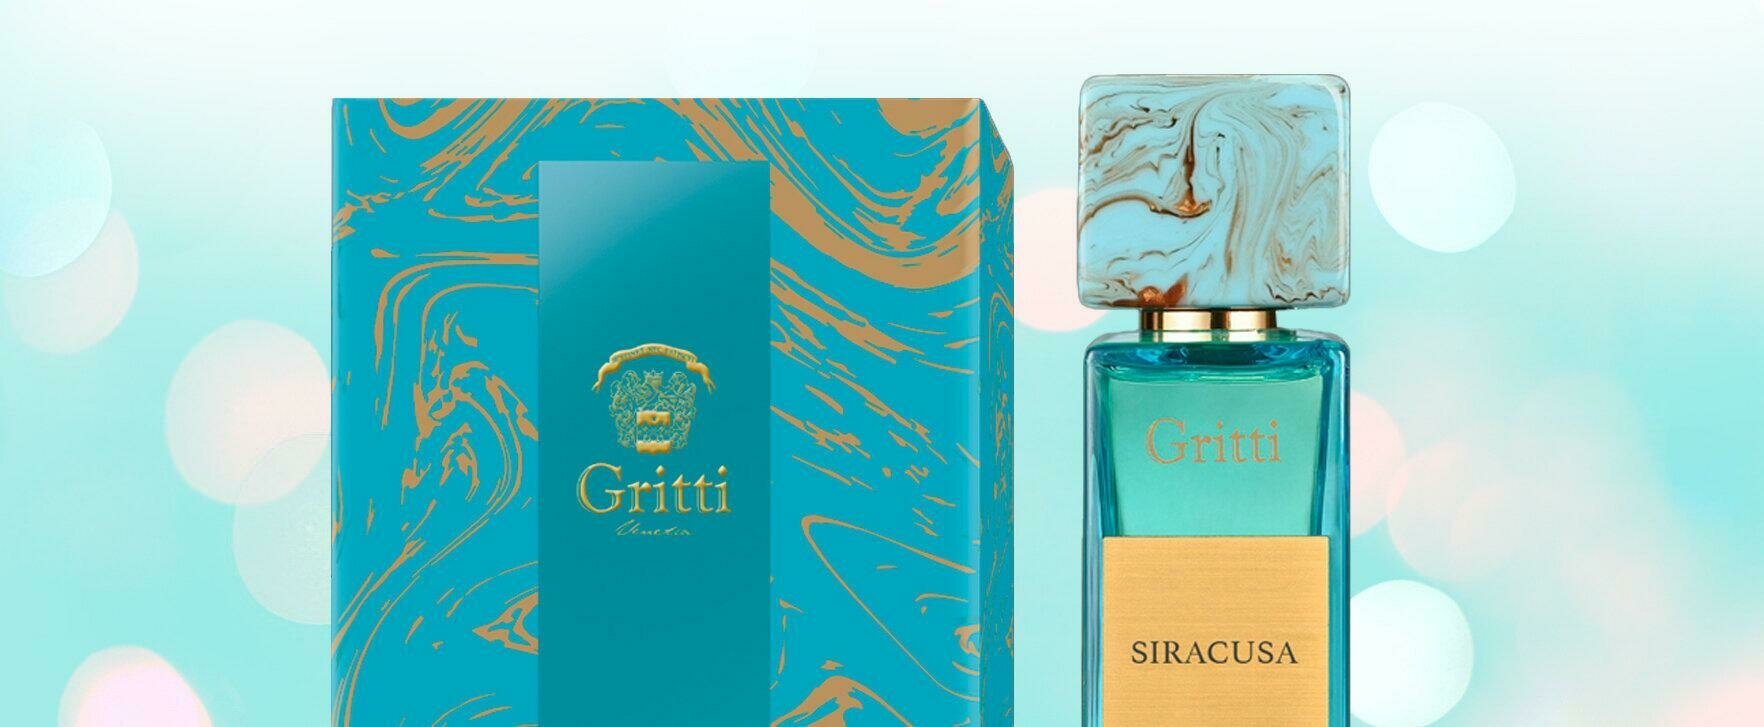 The New Unisex Fragrance Siracusa: An Ode to the Beauty of the Italian Summer